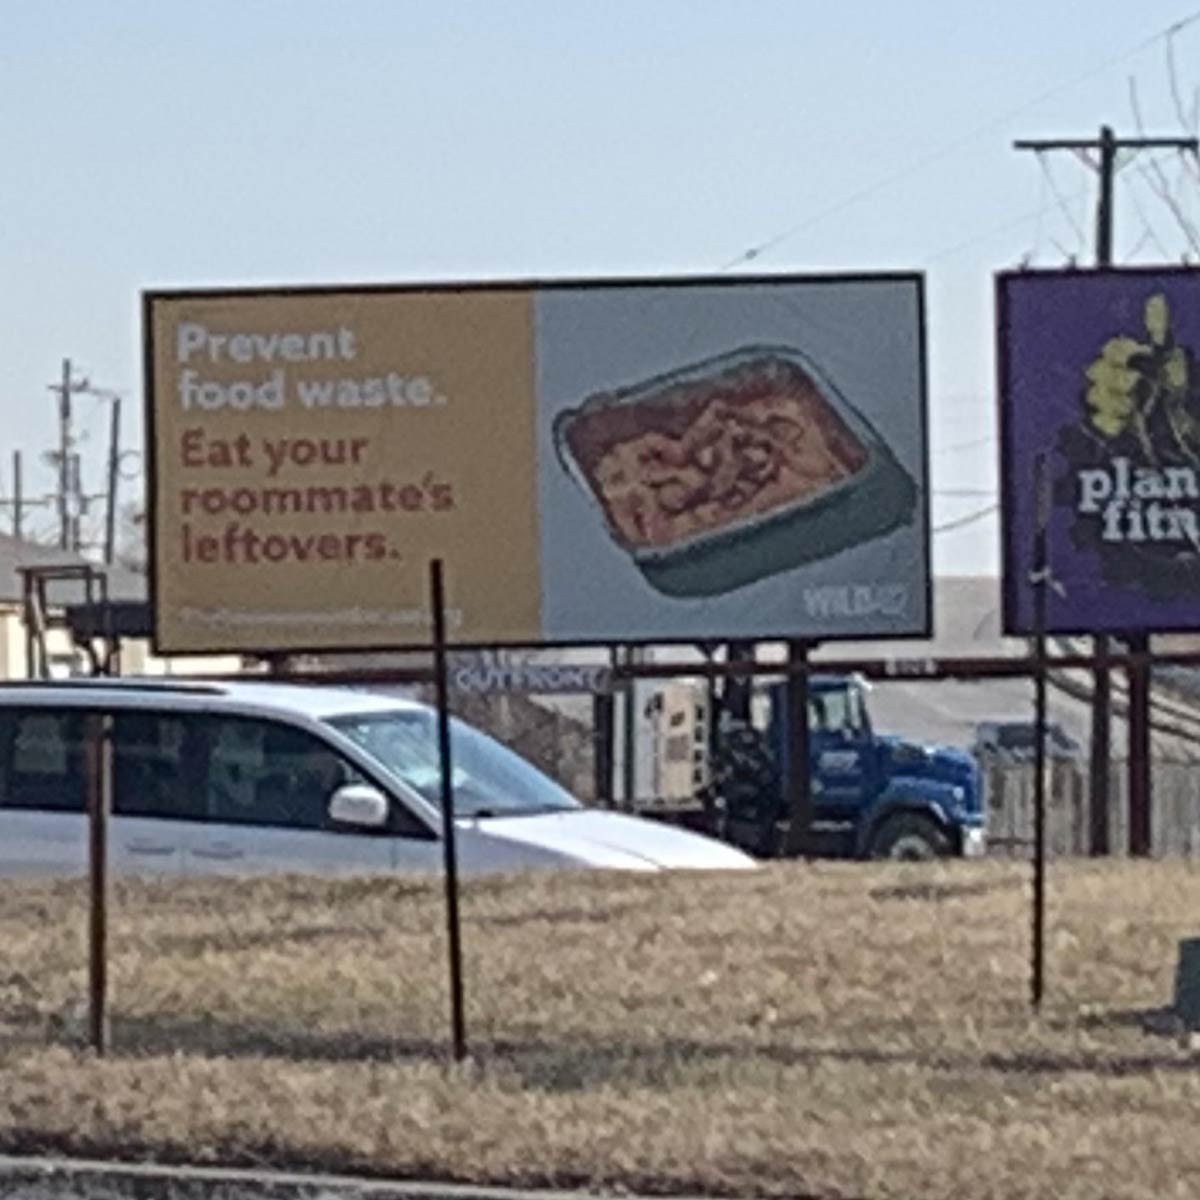 A billboard that encourages eating your roommate's leftovers